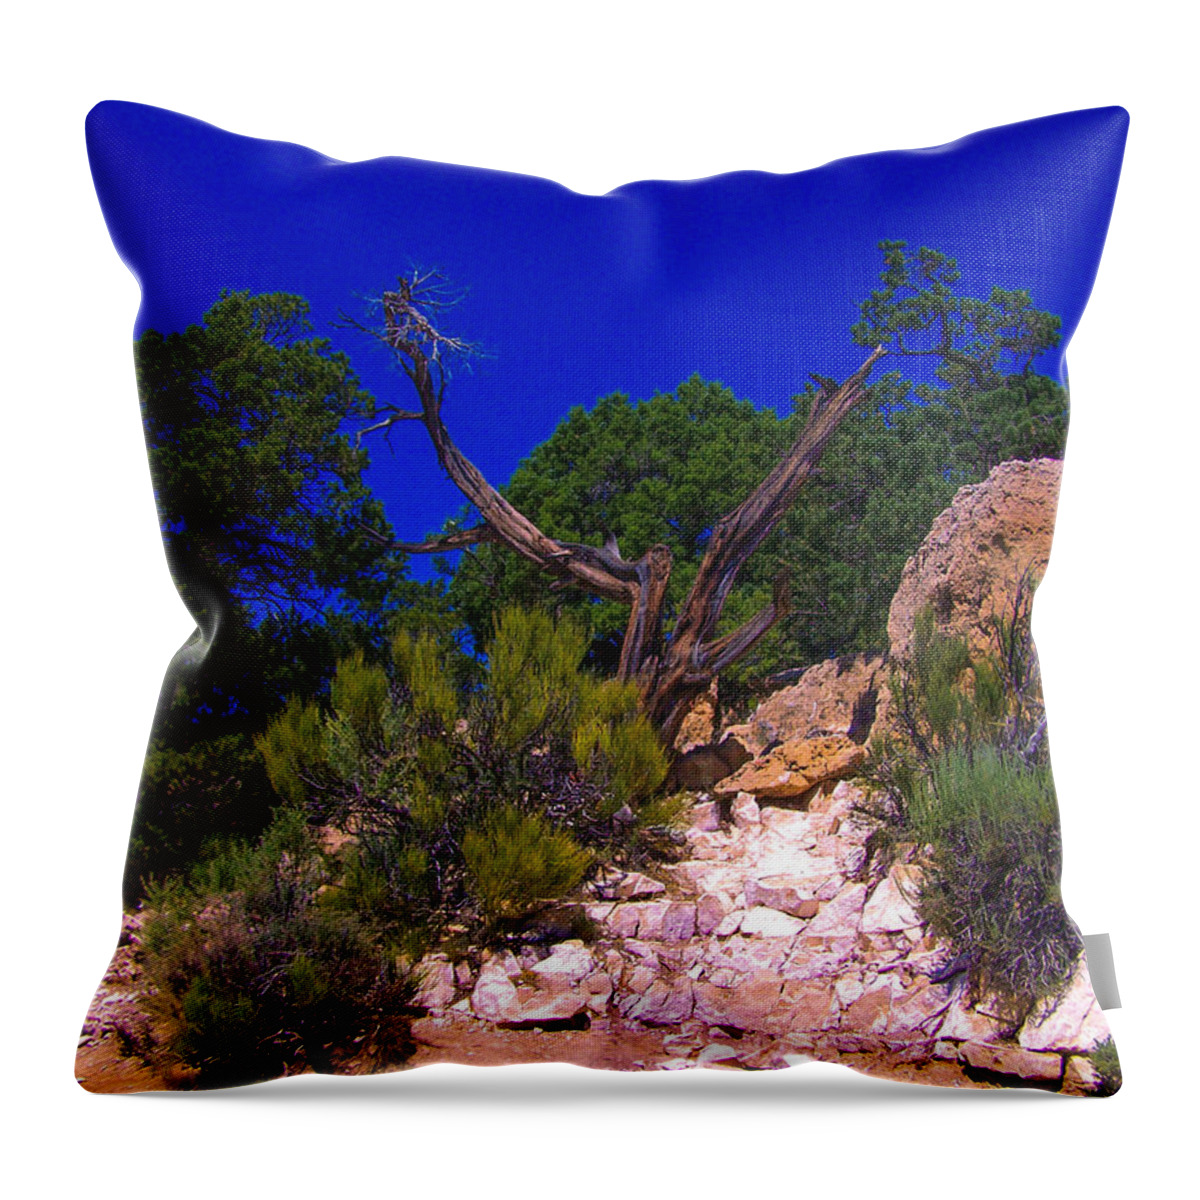 Grand Canyon Throw Pillow featuring the photograph Blue Sky Over the Canyon by Dany Lison